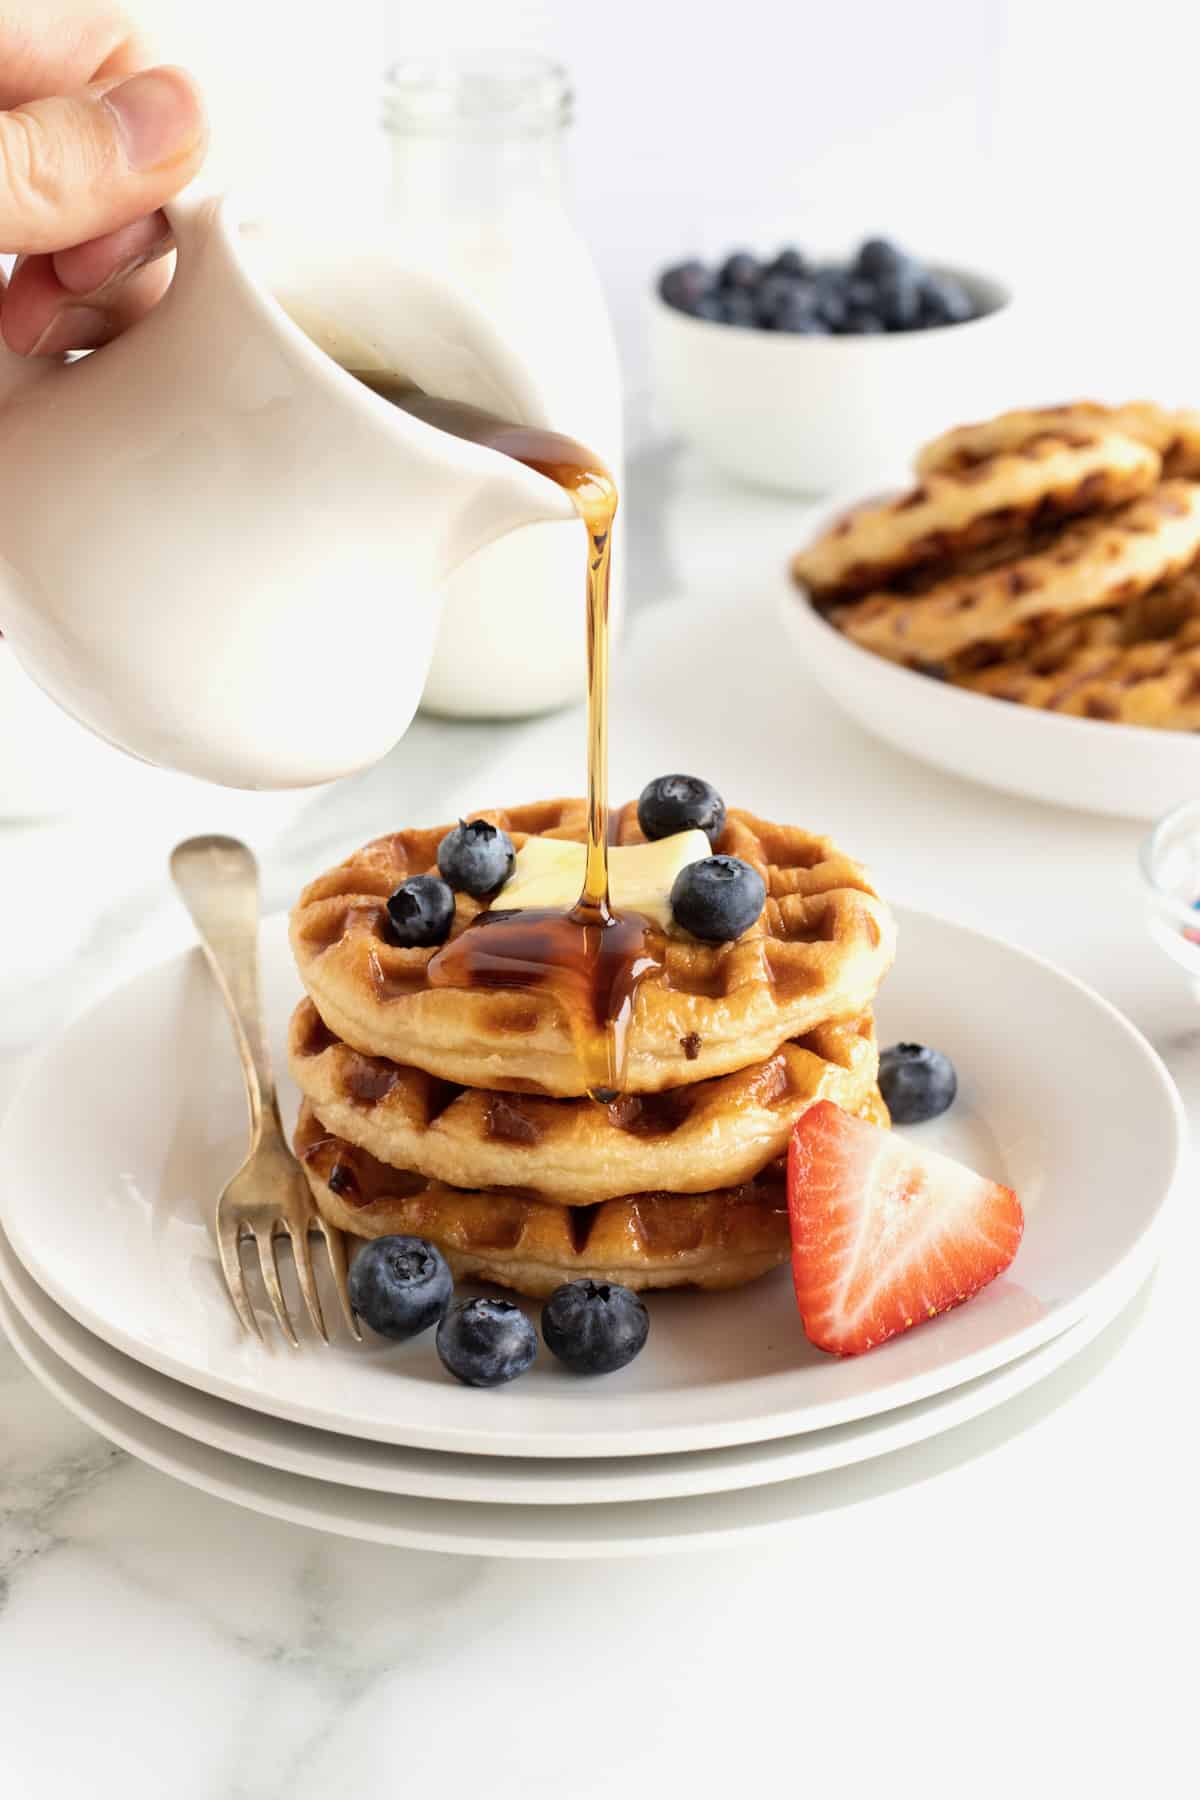 Three donut waffles stacked on a white plate with a square of butter, fresh blueberries and hot maple syrup poured over the top.